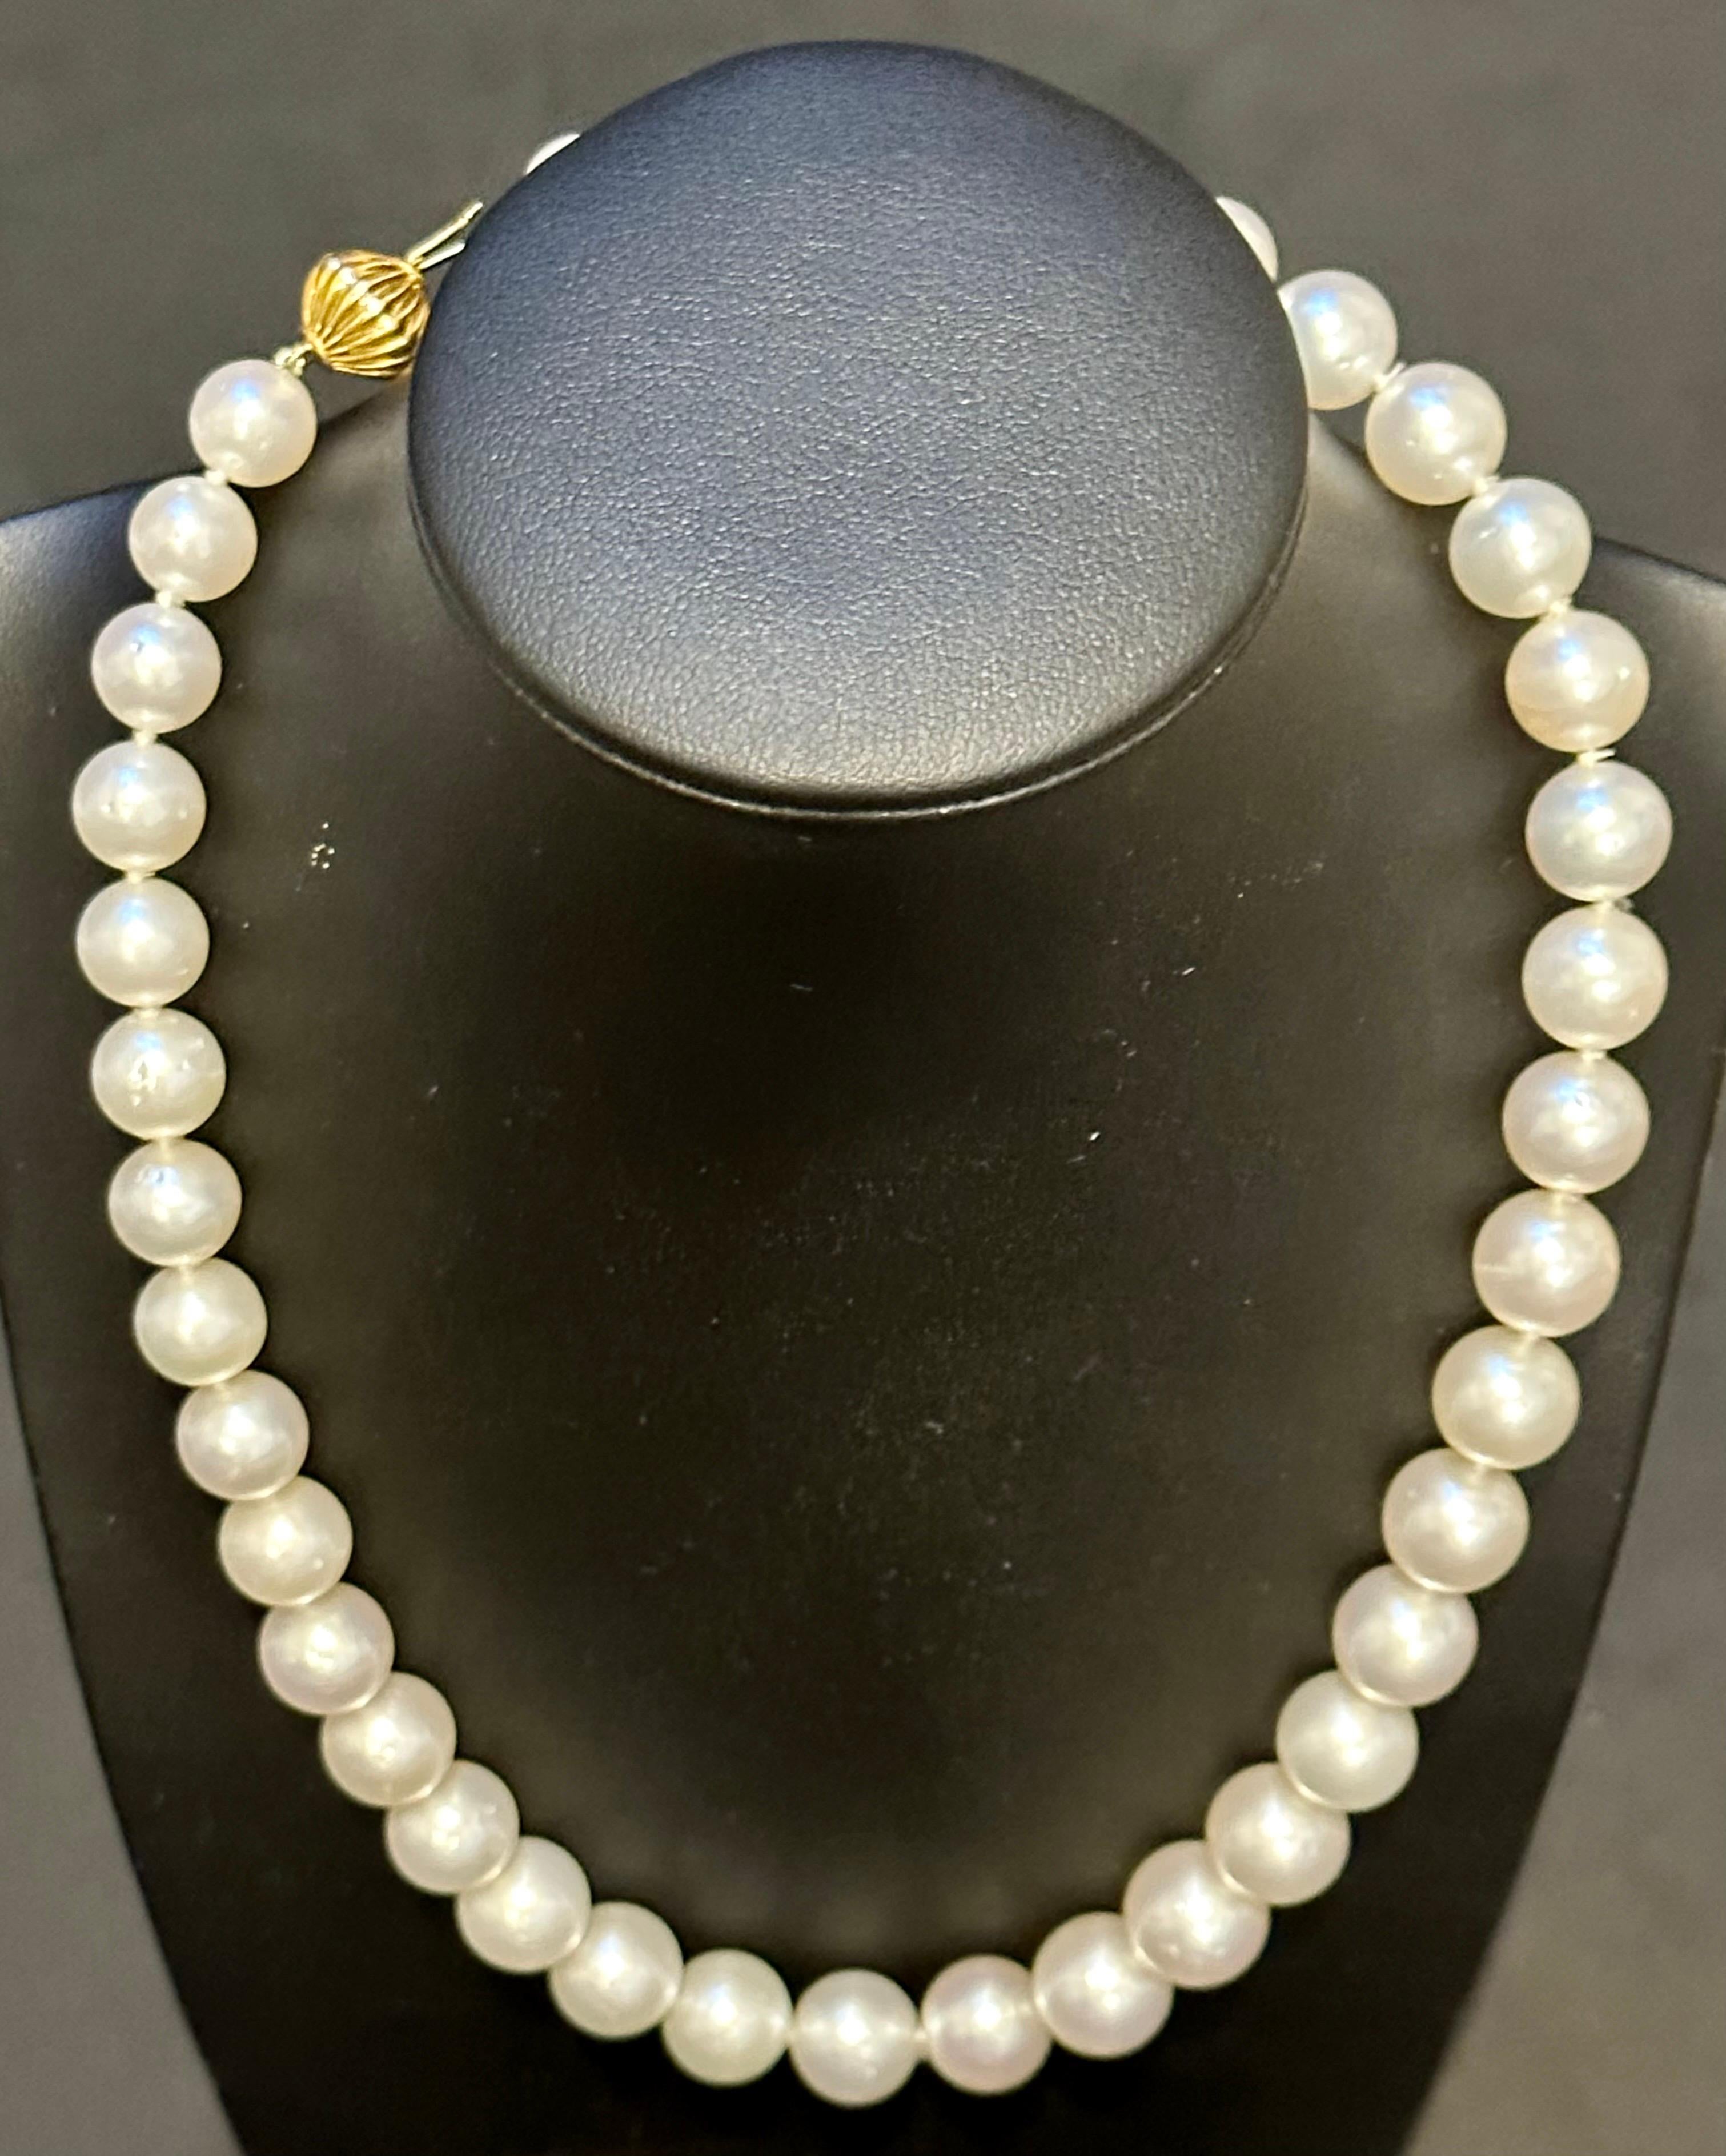 Women's Graduating White South Sea Pearls 9-12mm Strand Necklace 14 Kt Yellow Gold Clasp For Sale